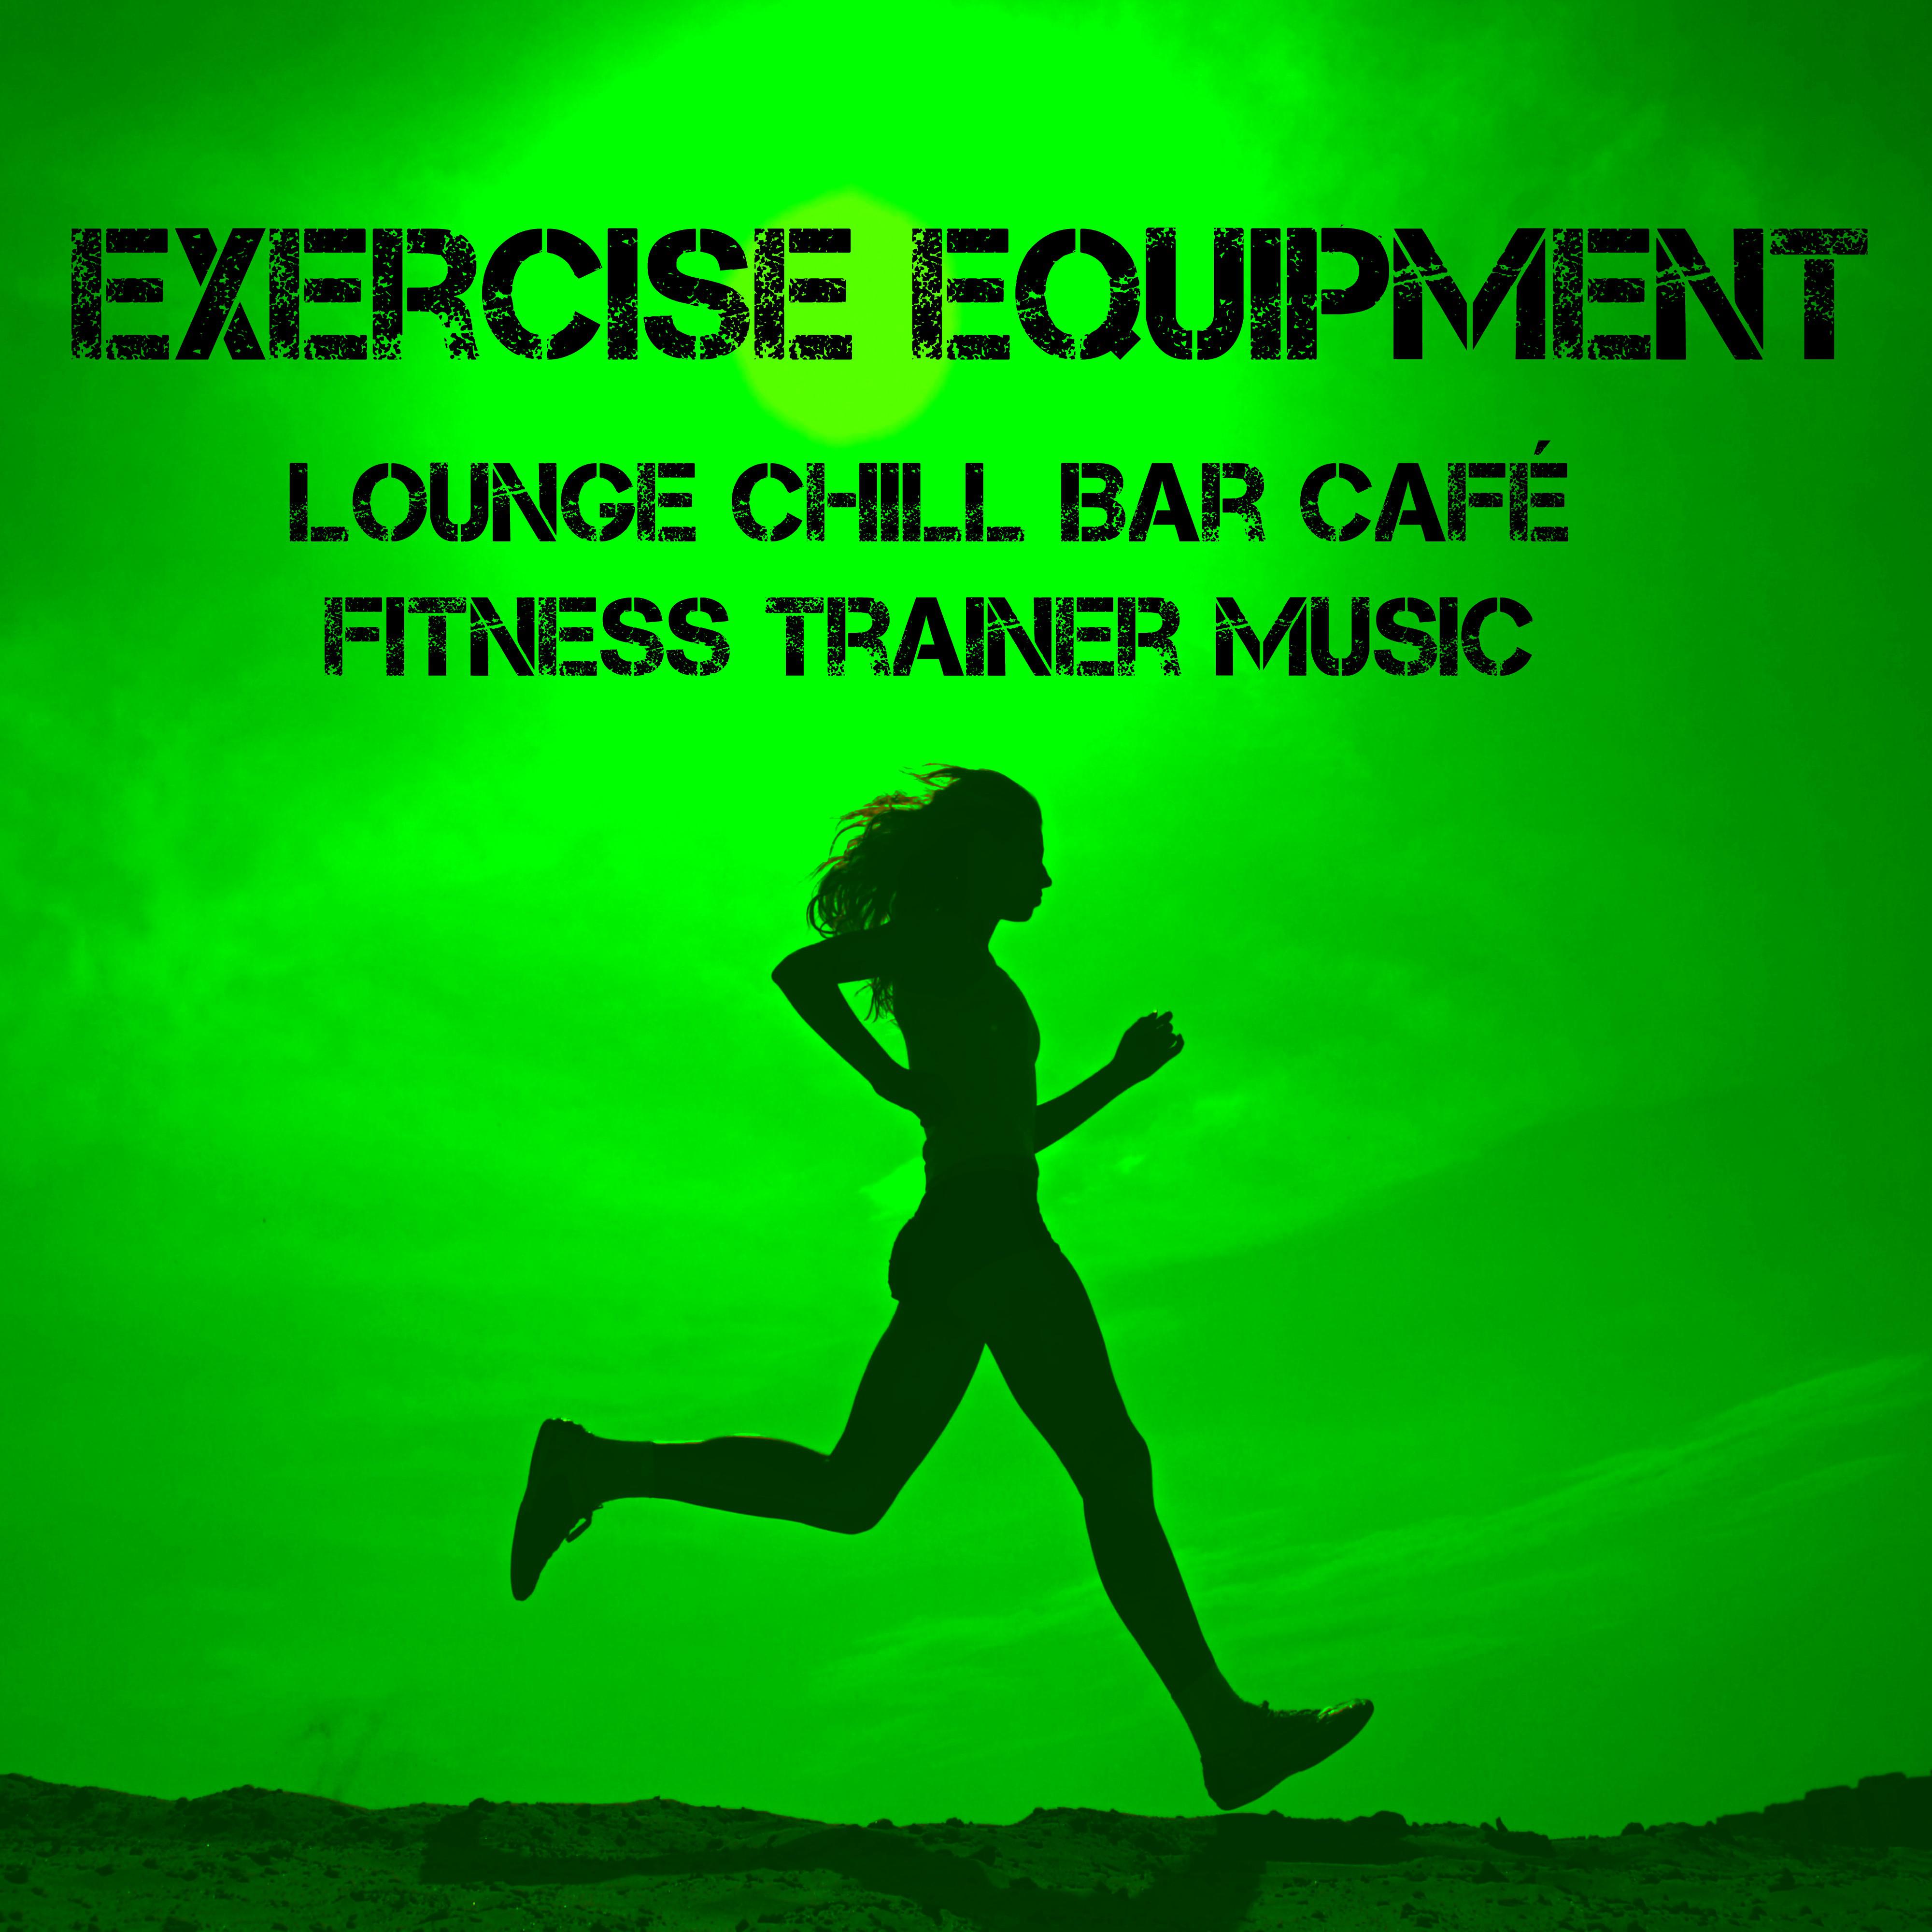 Exercise Equipment - Lounge Chill Bar Café Fitness Trainer Music for Soft Sport Session and Motivational Mood